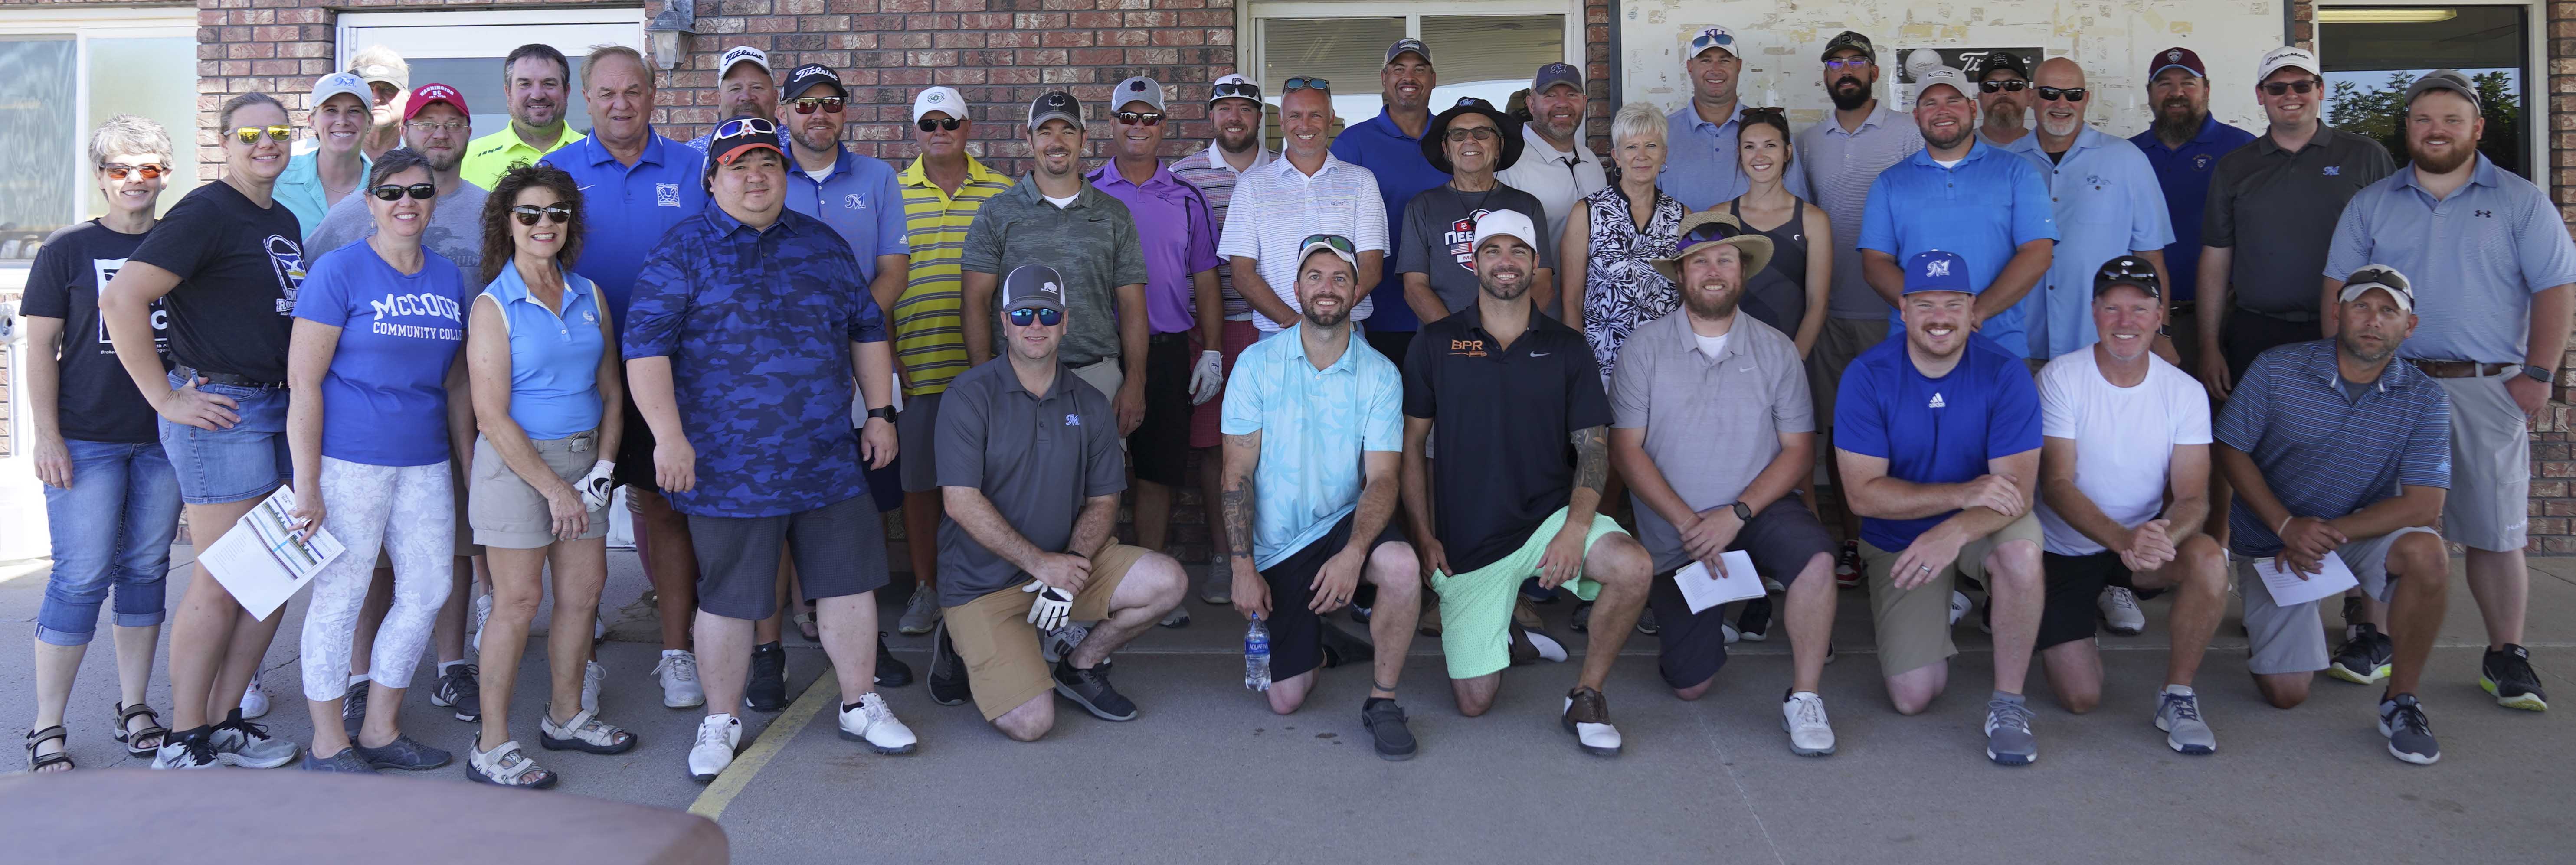 McCook Community College alumni and staff gathered for a group photo prior to Saturday’s MCC alumni/community golf tournament held at Heritage Hills Golf Course.